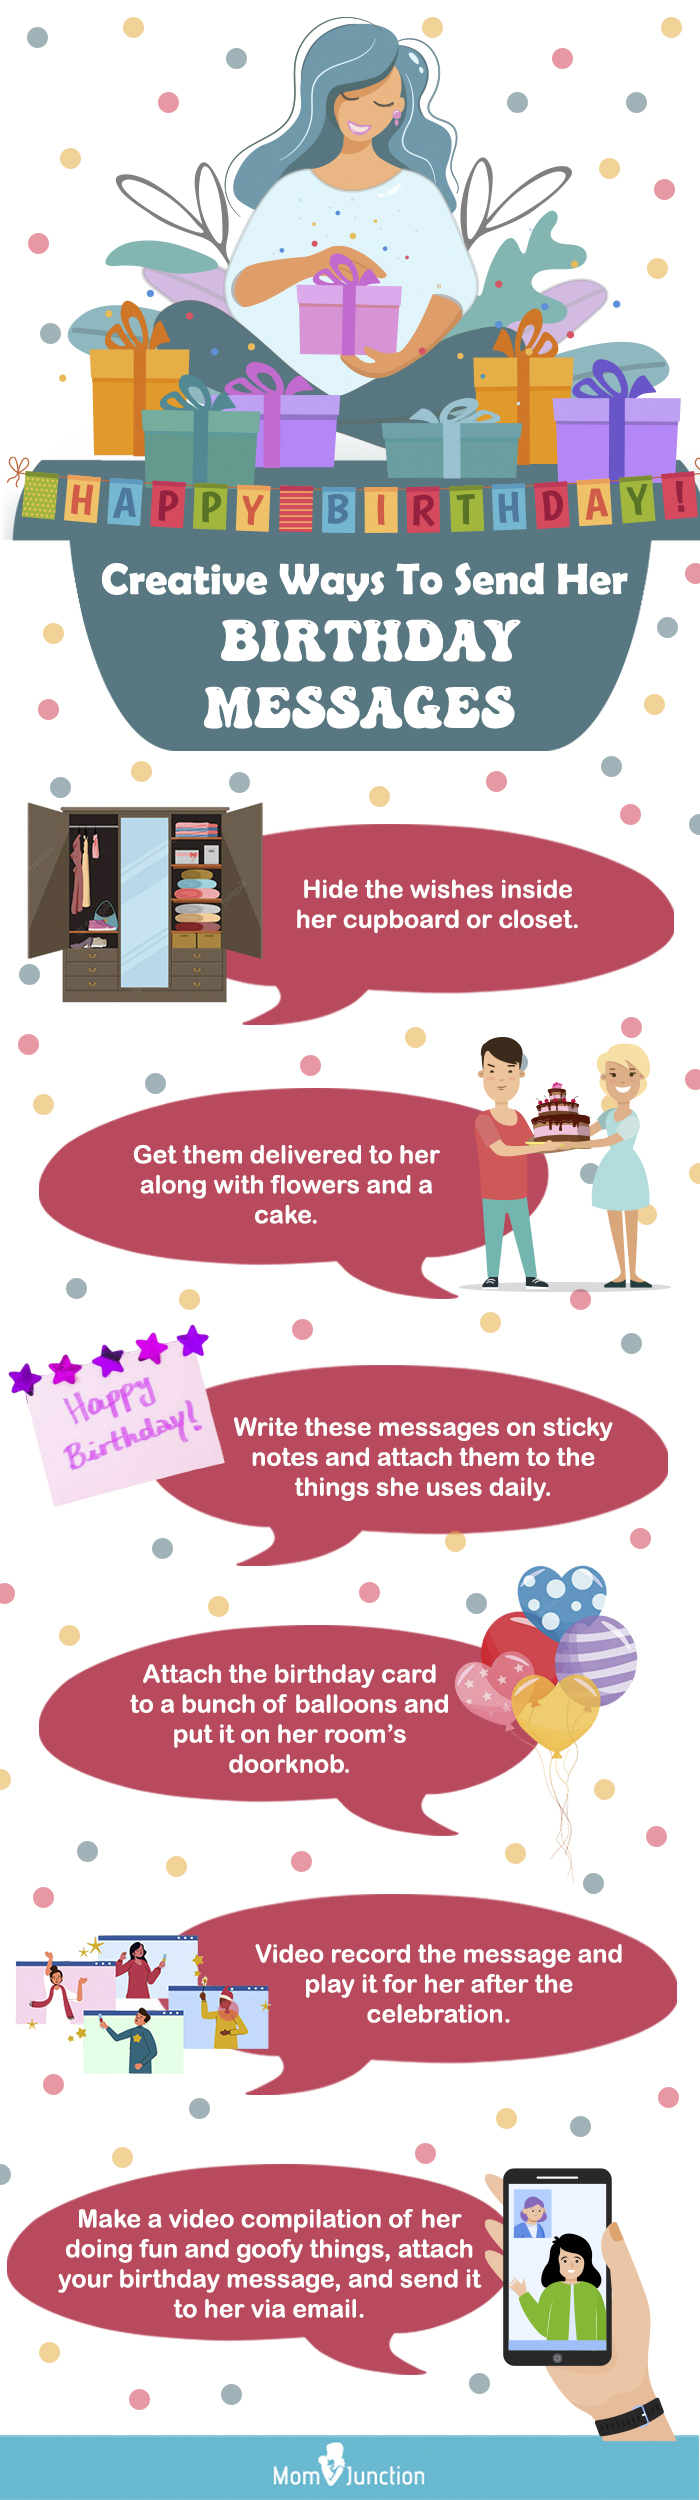 ways to send her birthday messages (infographic)